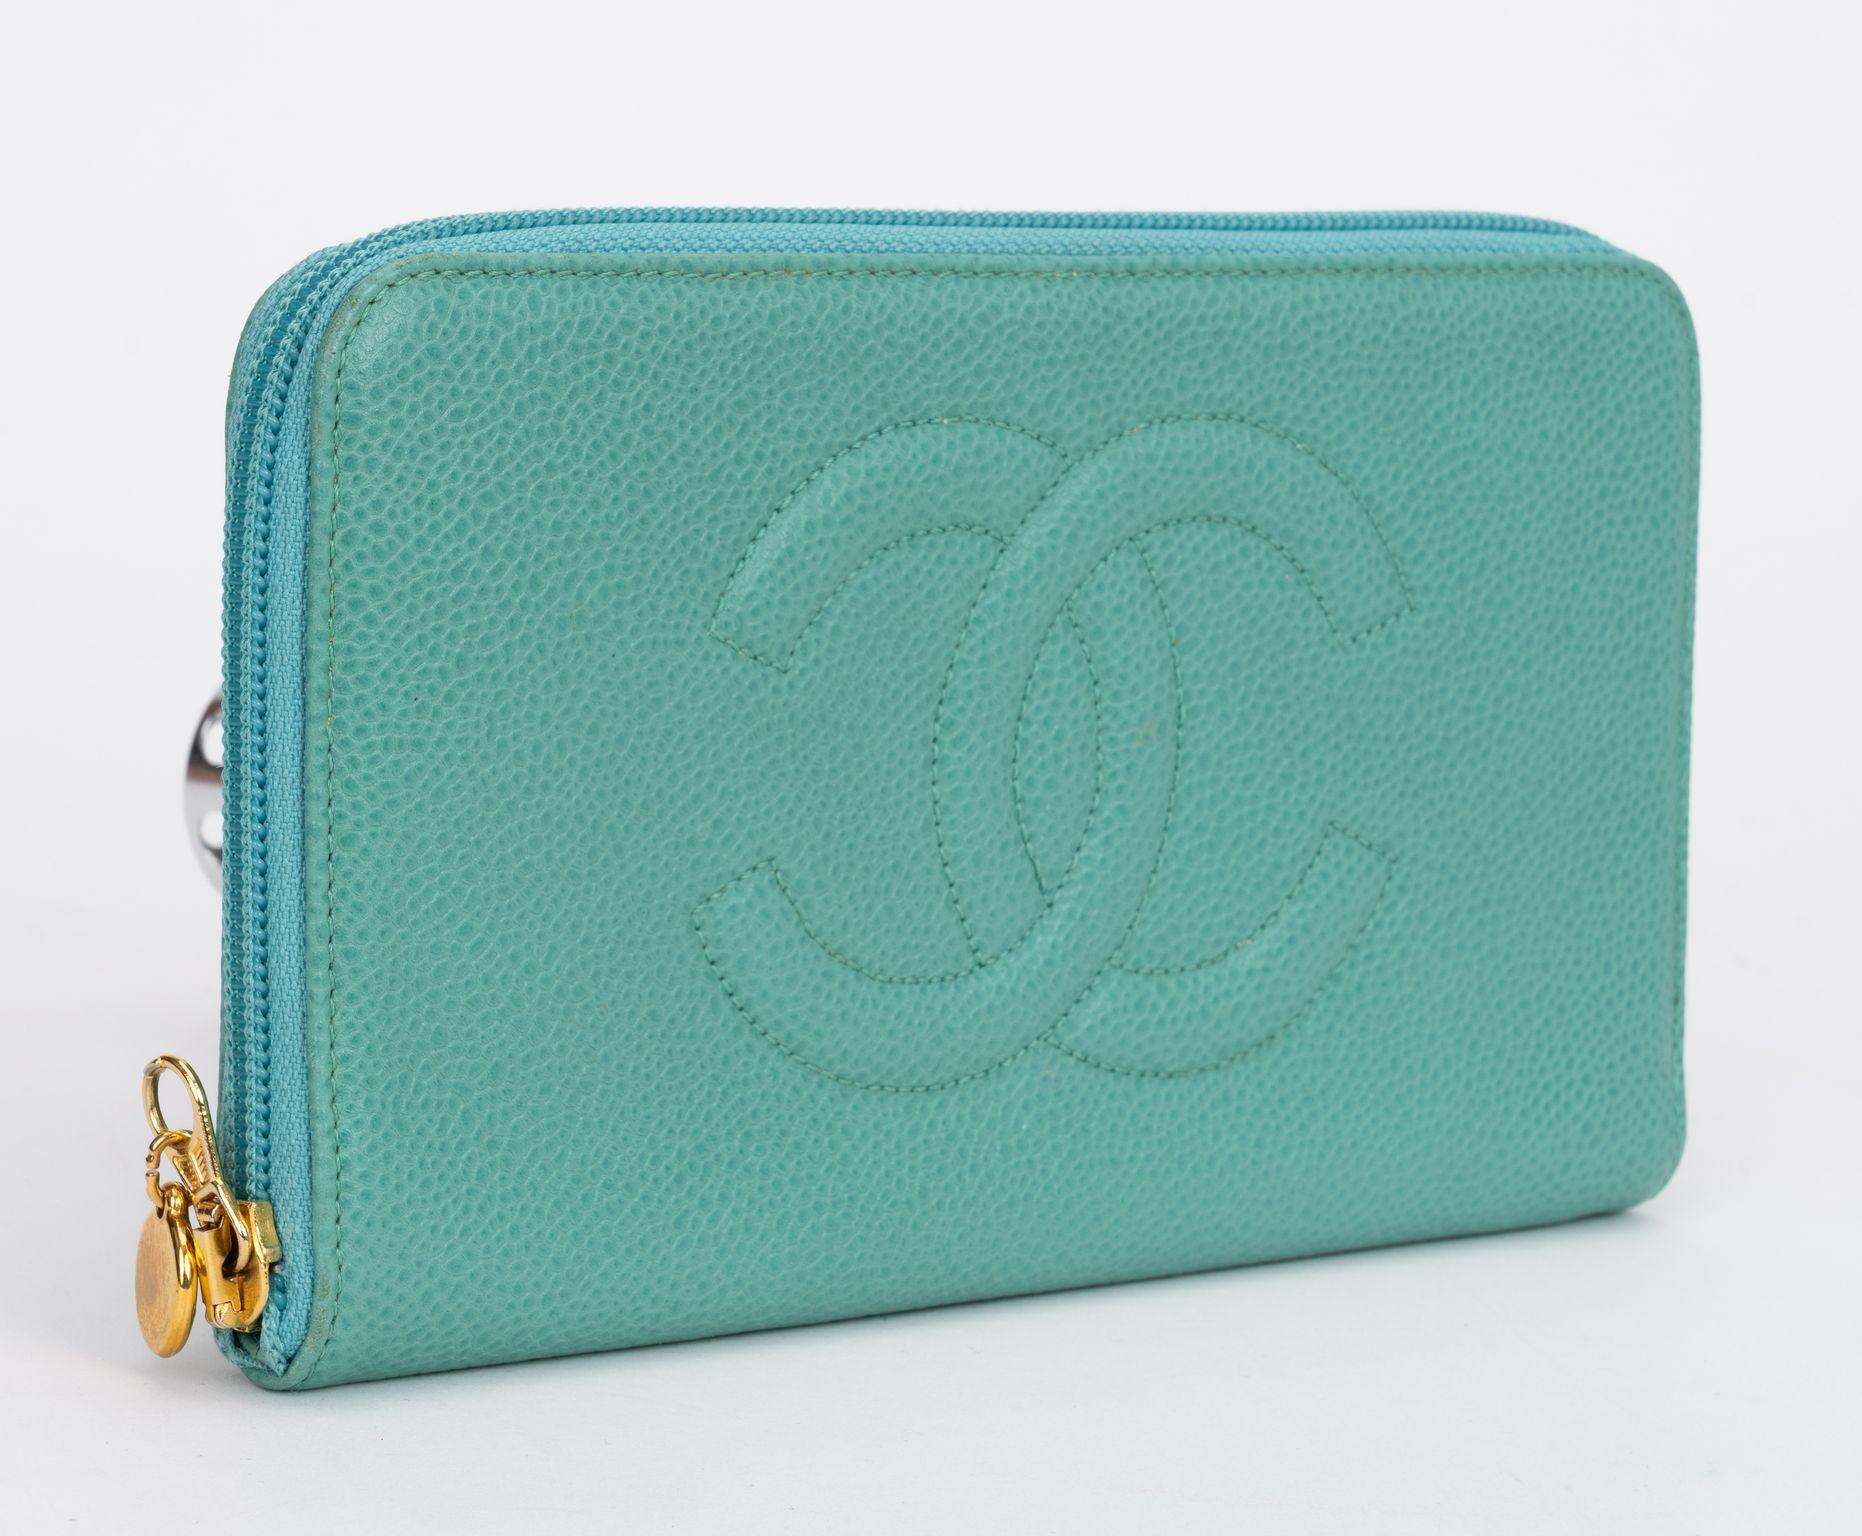 Chanel preloved aqua caviar leather large zip around wallet. Gold tone hardware. Collection 5. Comes with hologram and original box.